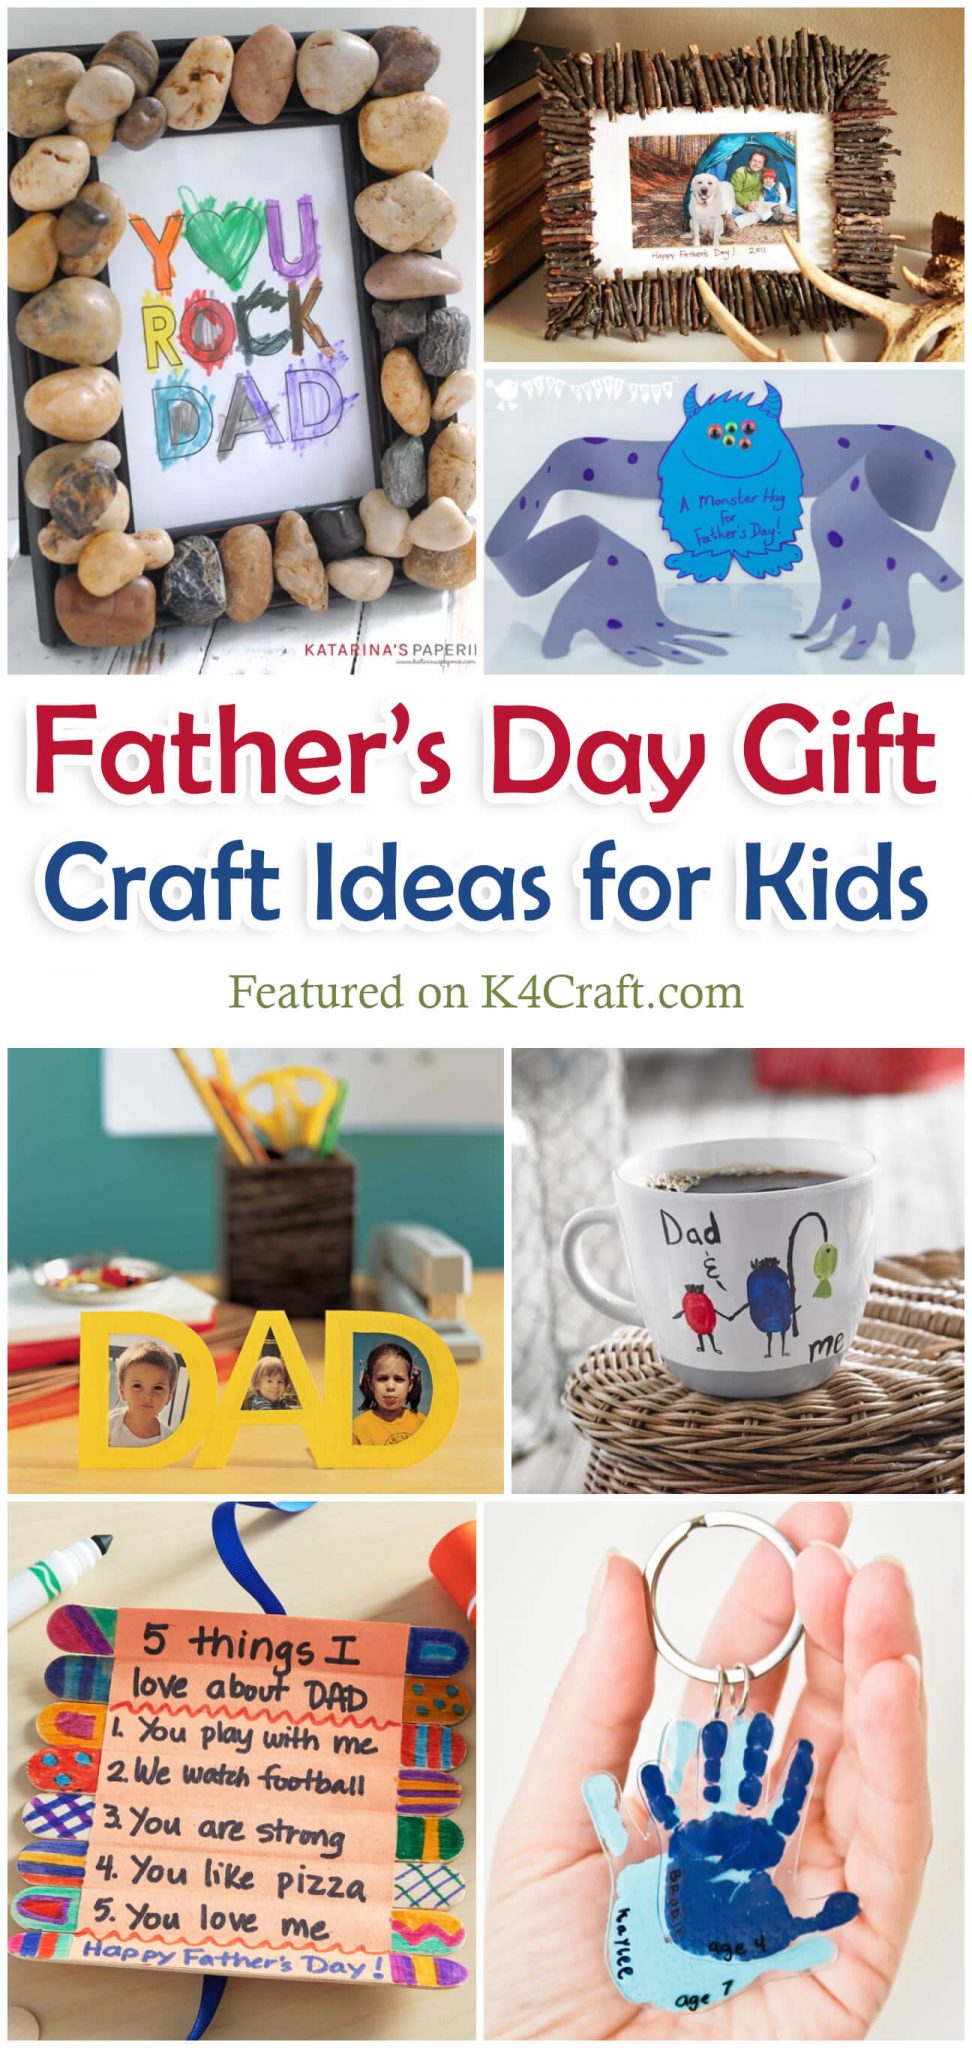 Awesome Father's Day Gift Ideas That He'll Love